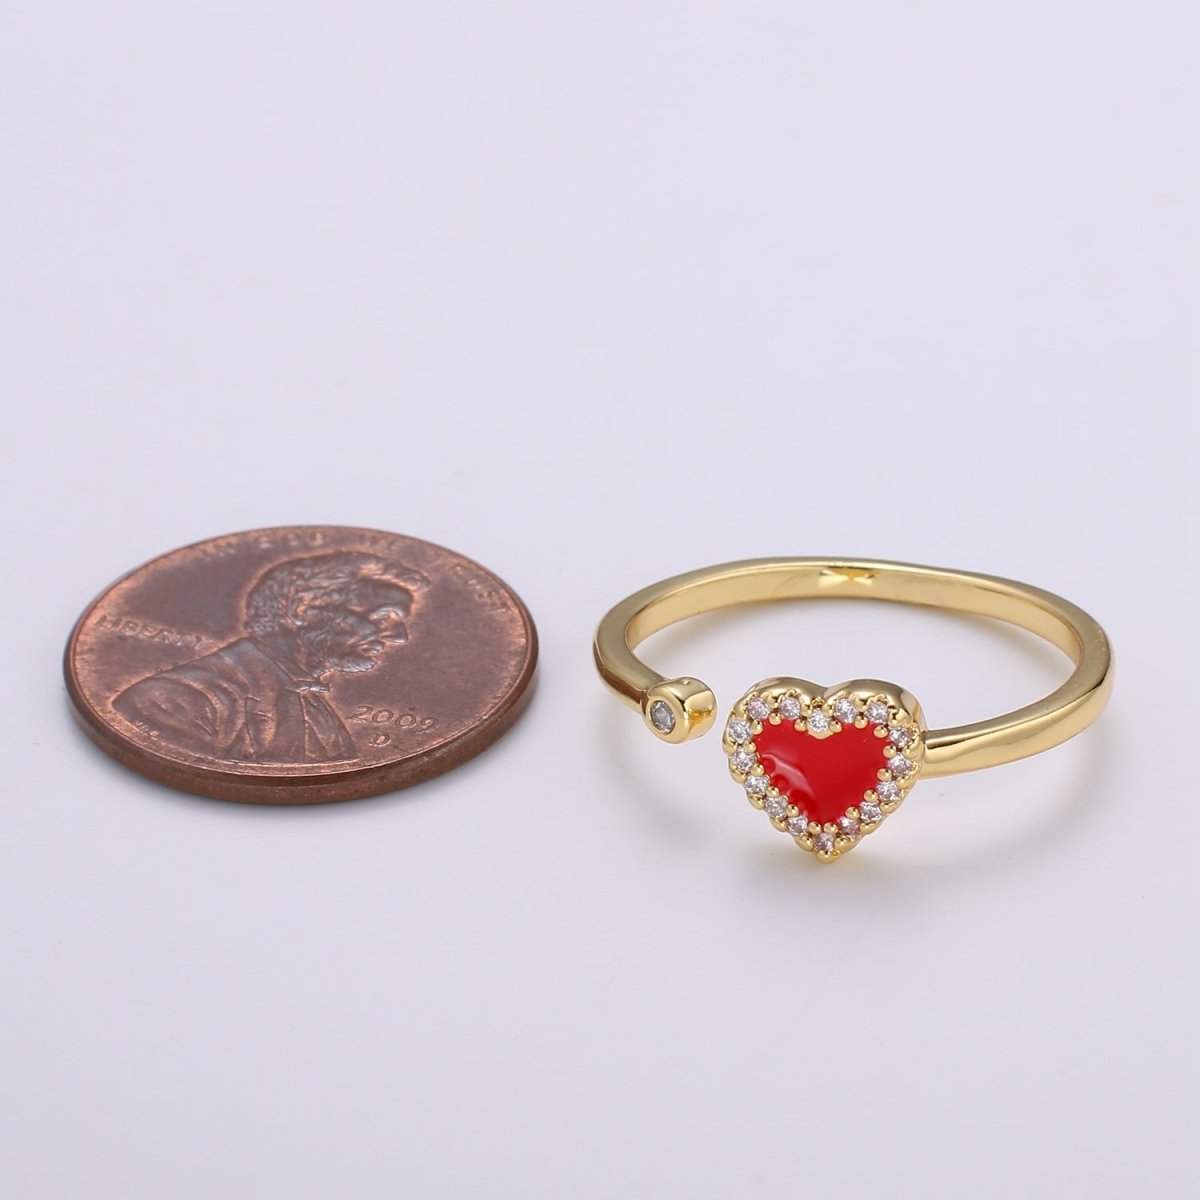 1pc 24K Gold Enamel Cubic Heart Ring, Pink Epoxy Love CZ Pendant Charm, Solitaire Cubic Zirconia Design Band For DIY Jewelry R-317,R-318 - DLUXCA